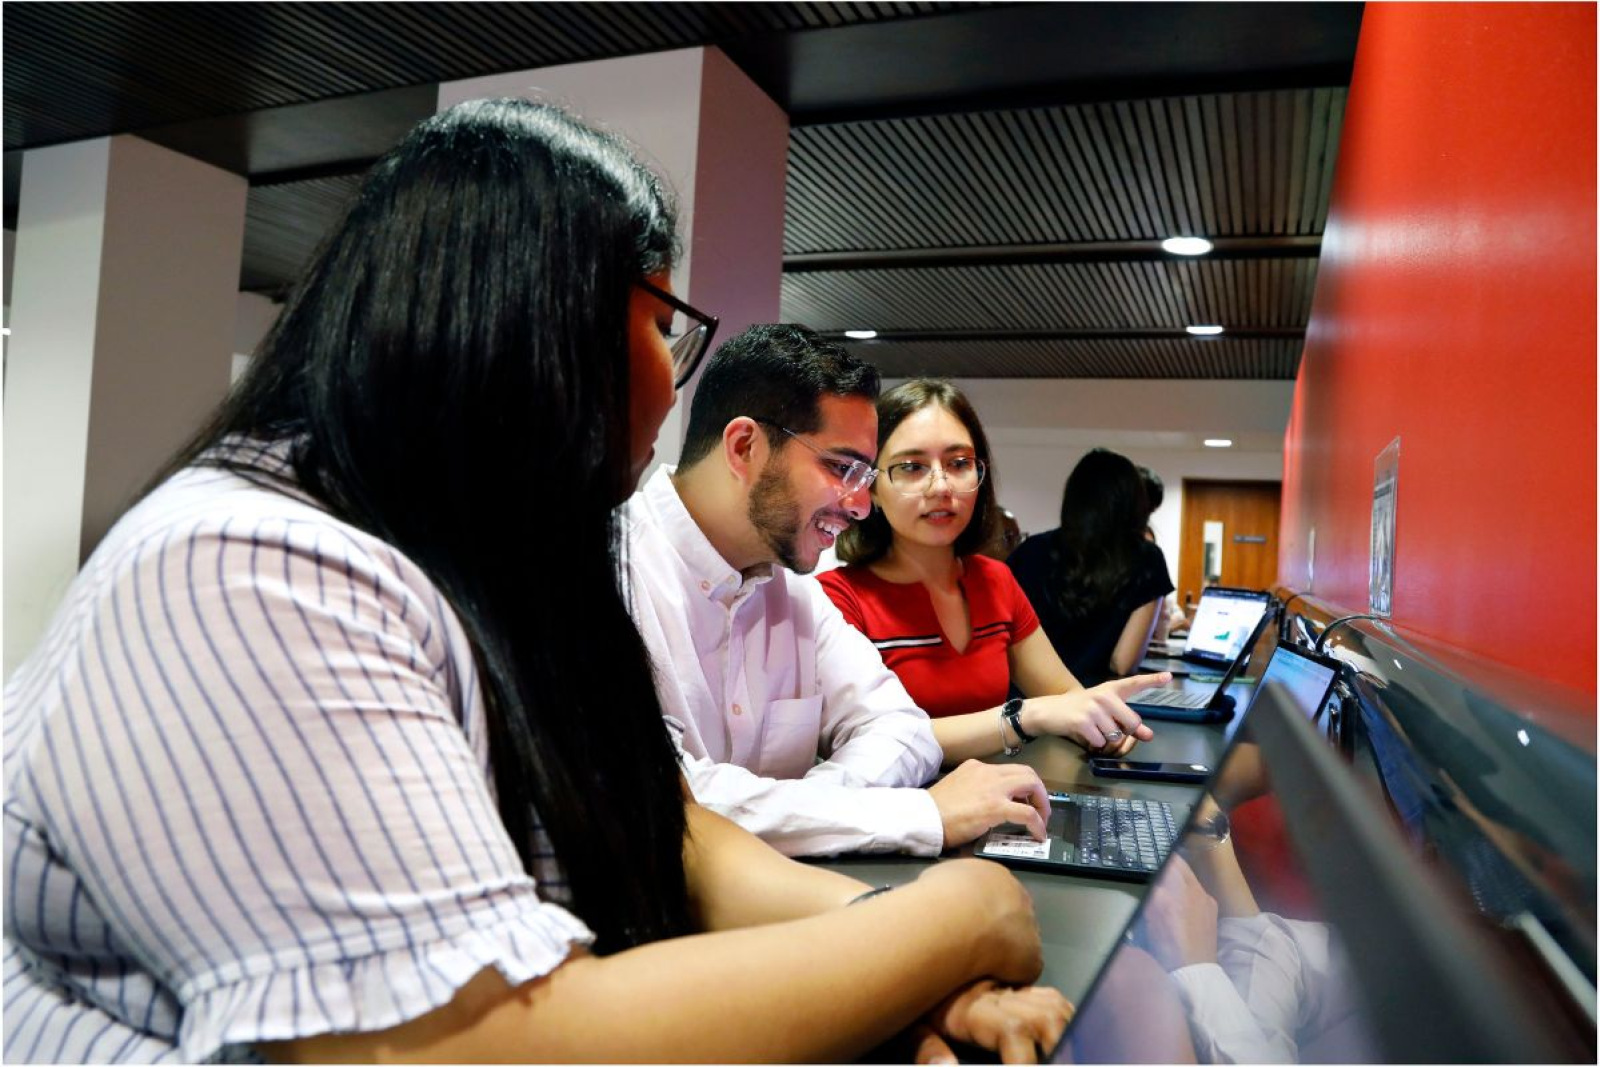 3 postgraduate students studying with laptops at the University of Edinburgh Business School